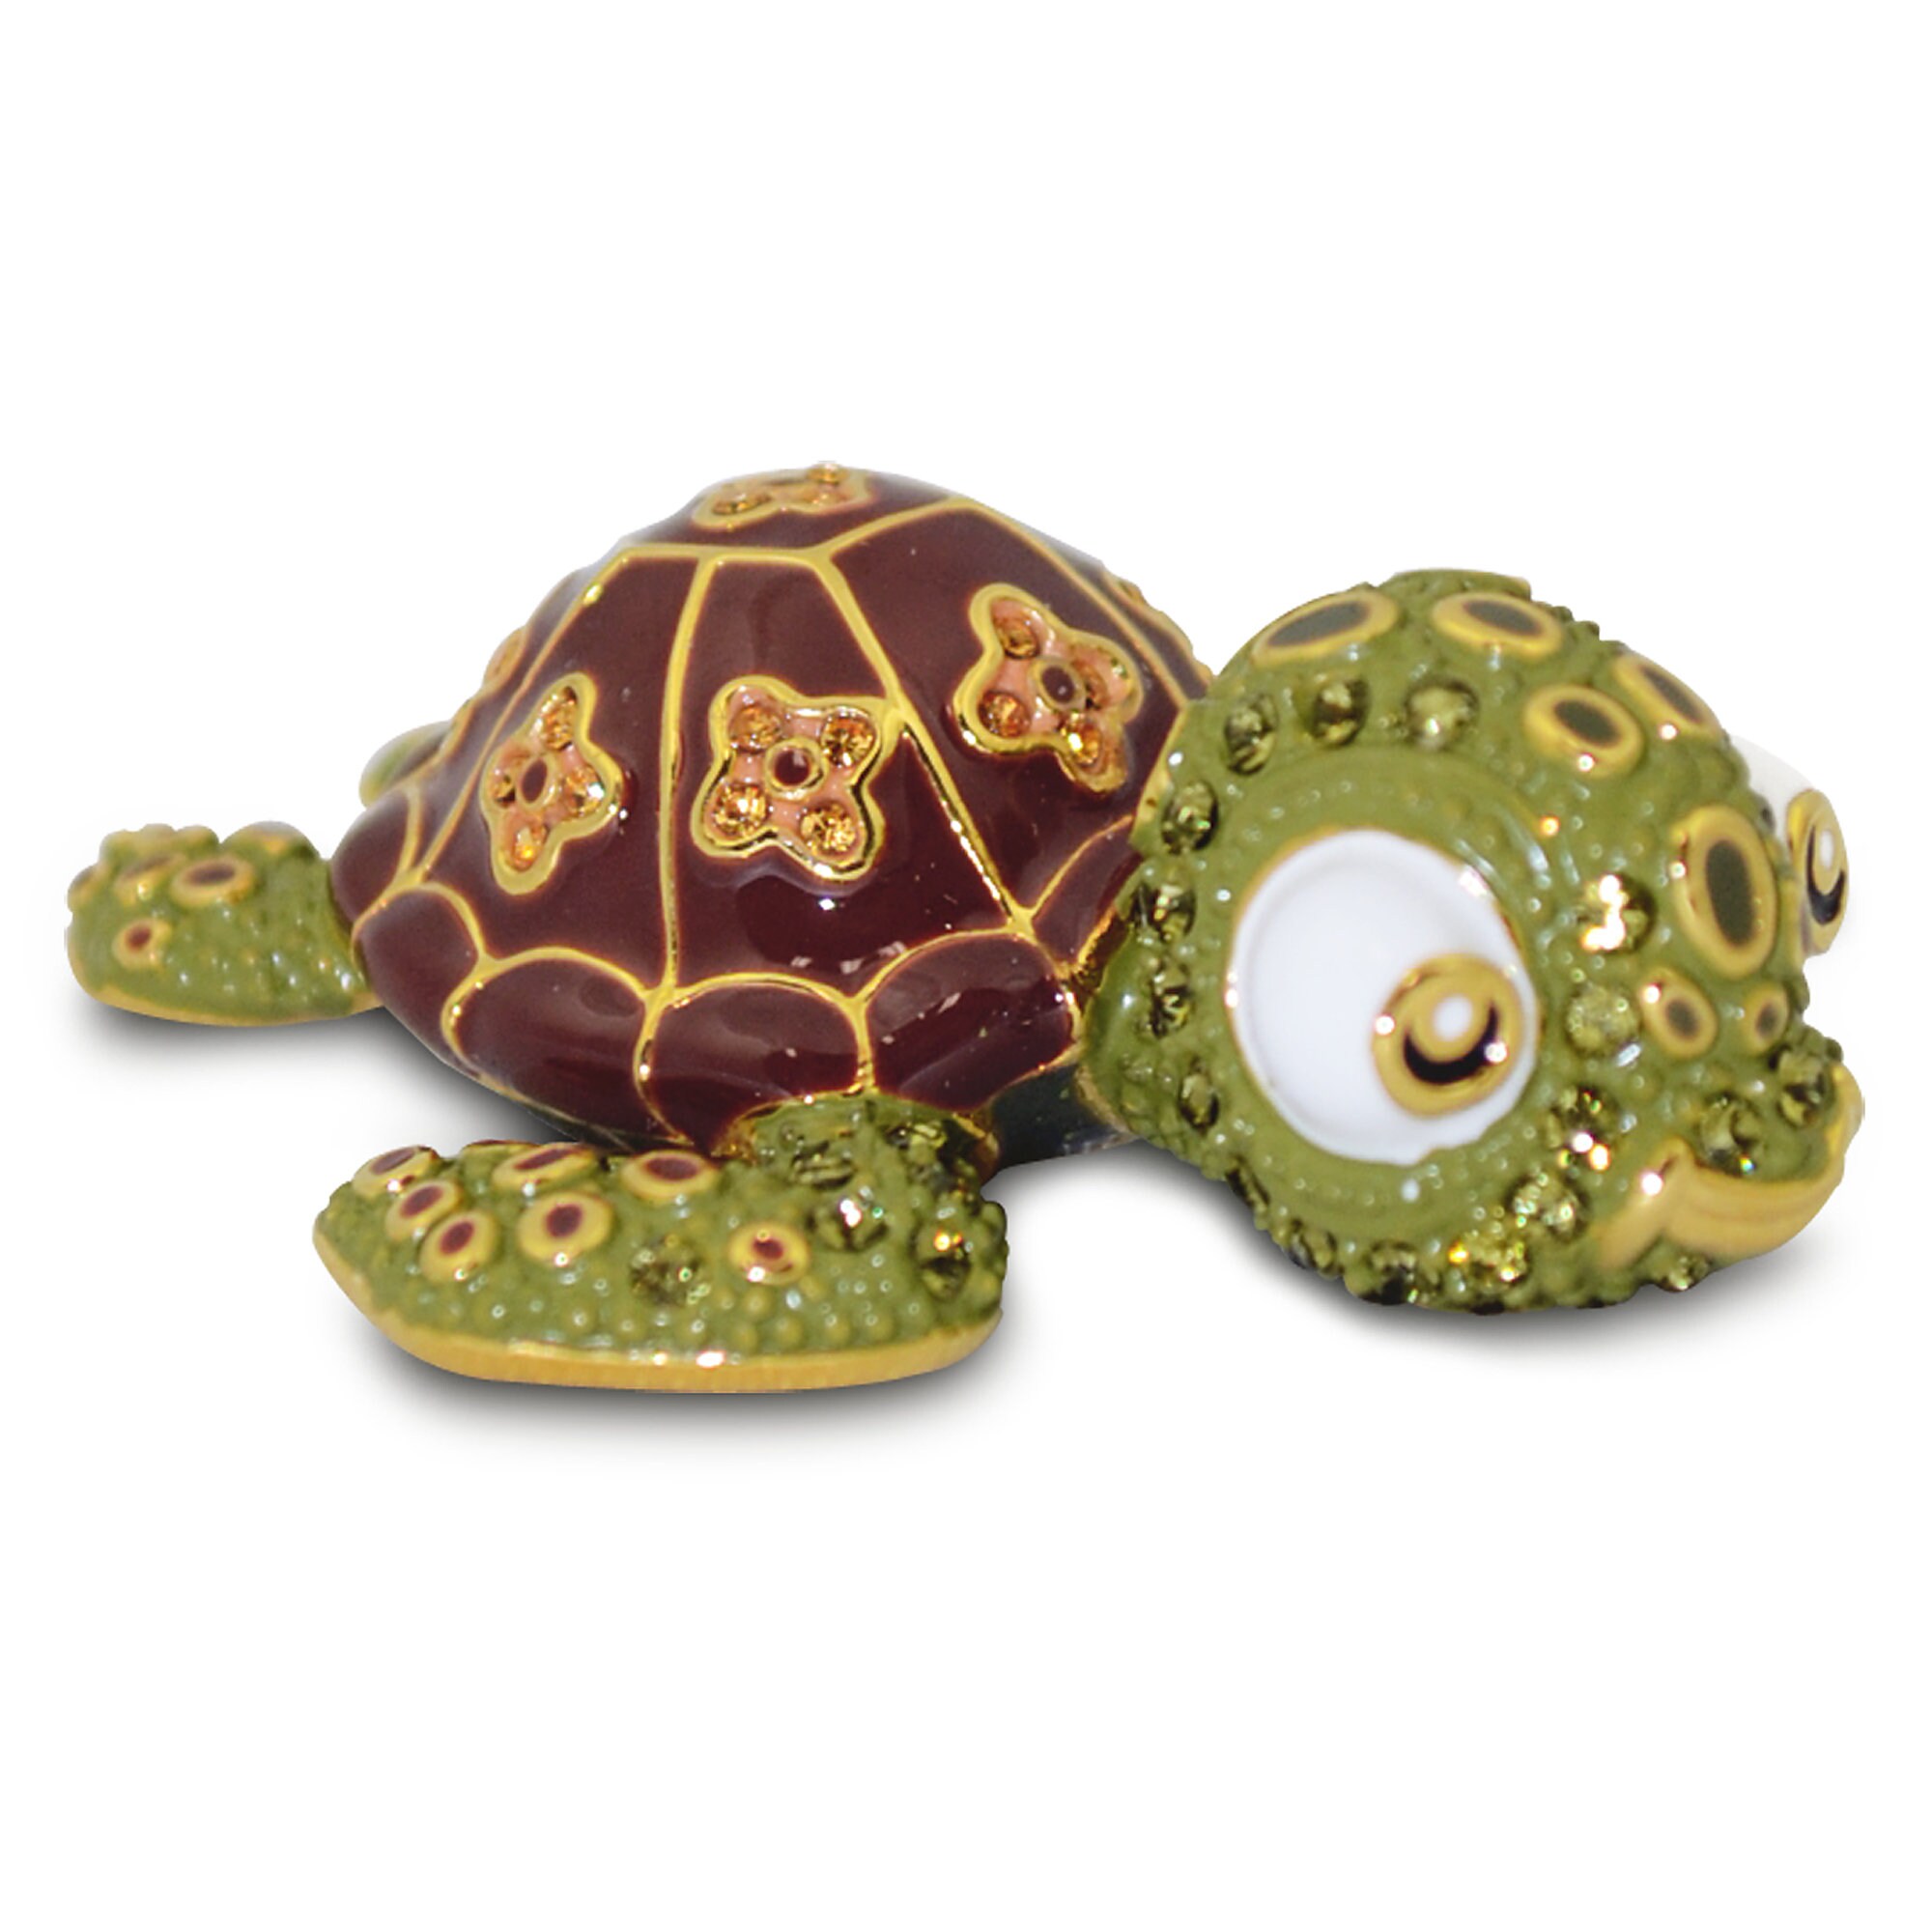 Squirt Jeweled Figurine by Arribas